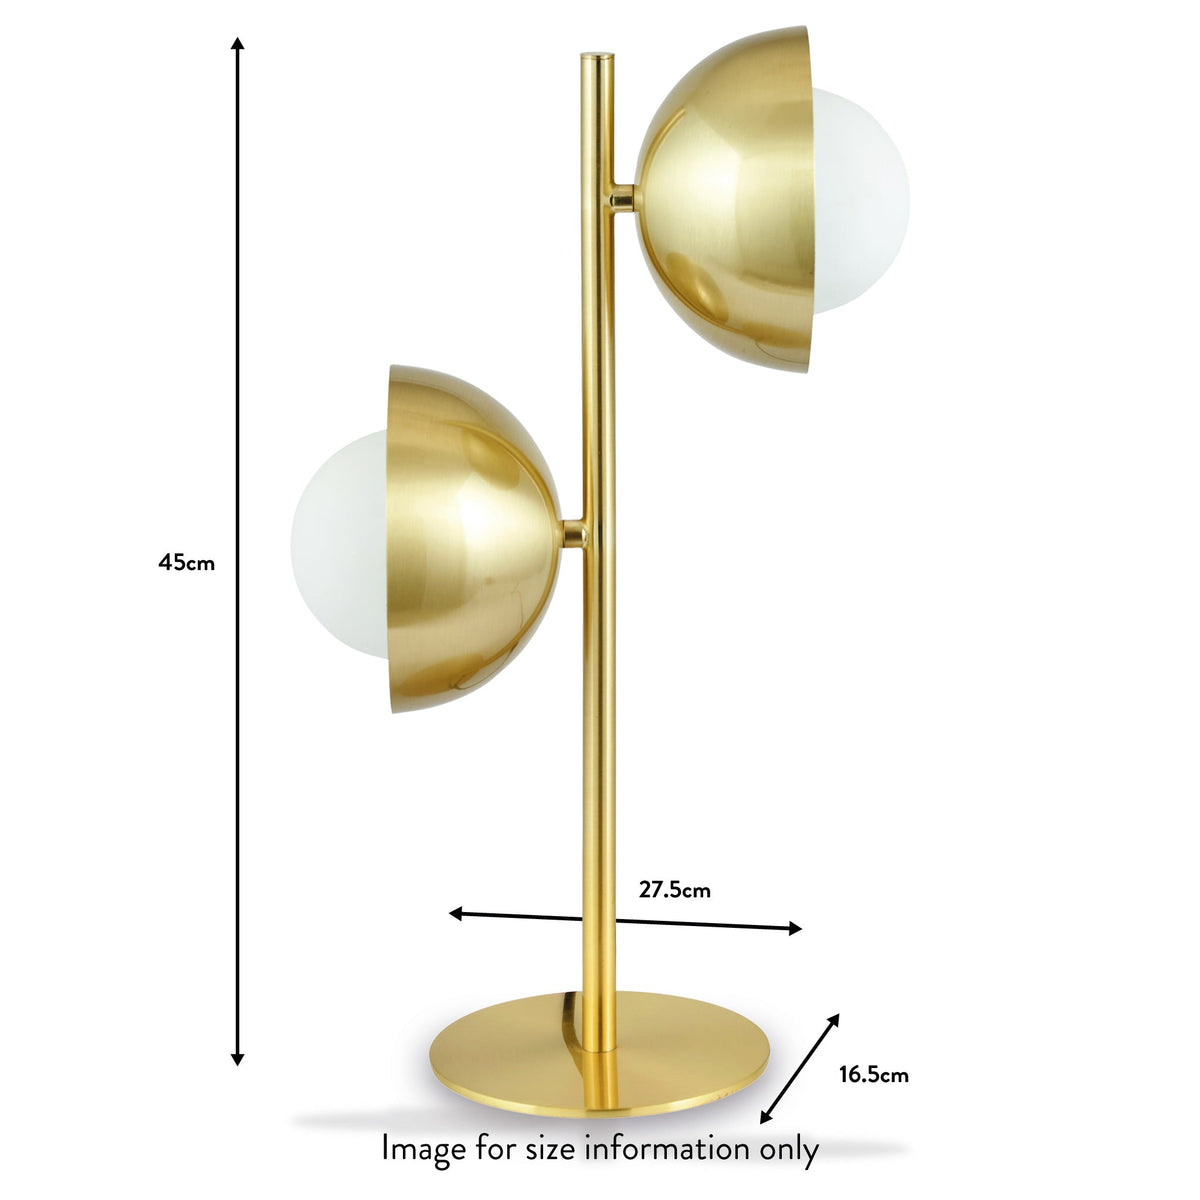 Estelle Brushed Brass Metal and White Orb Dome Table Lamp dimensions